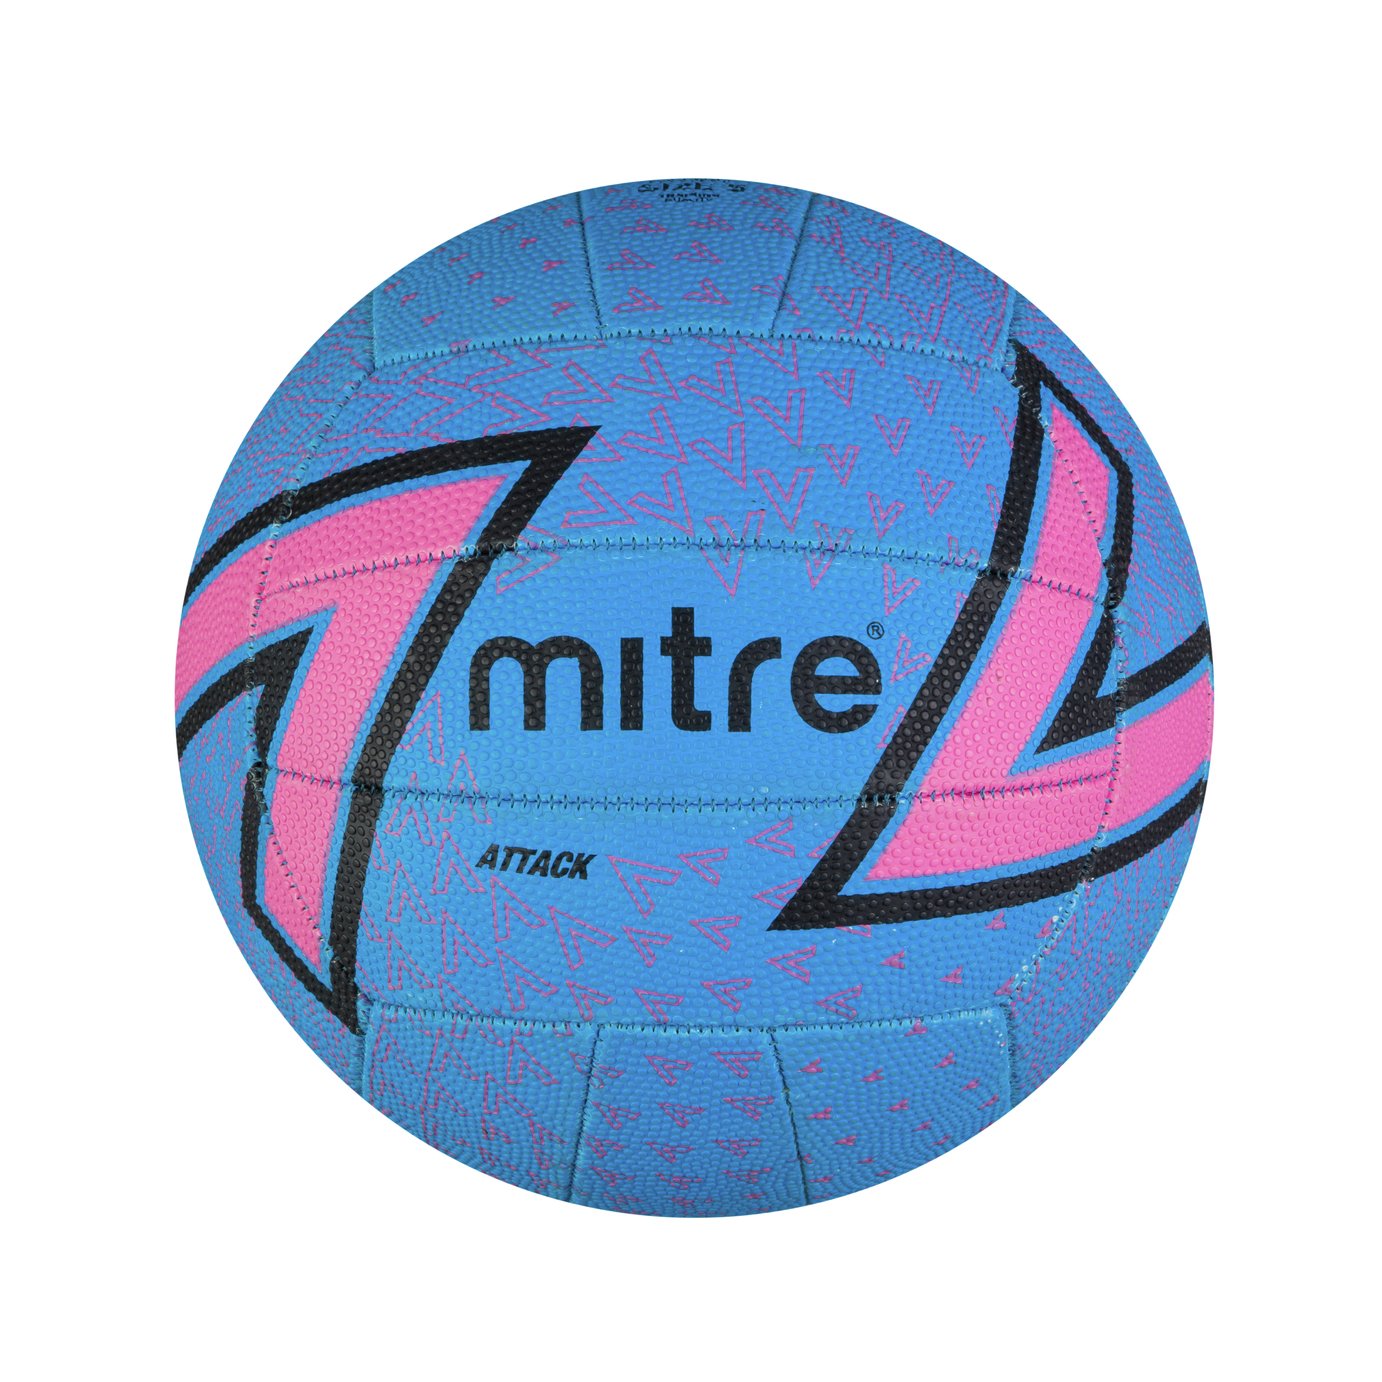 Mitre Attack Size 5 Netball - Blue/Pink